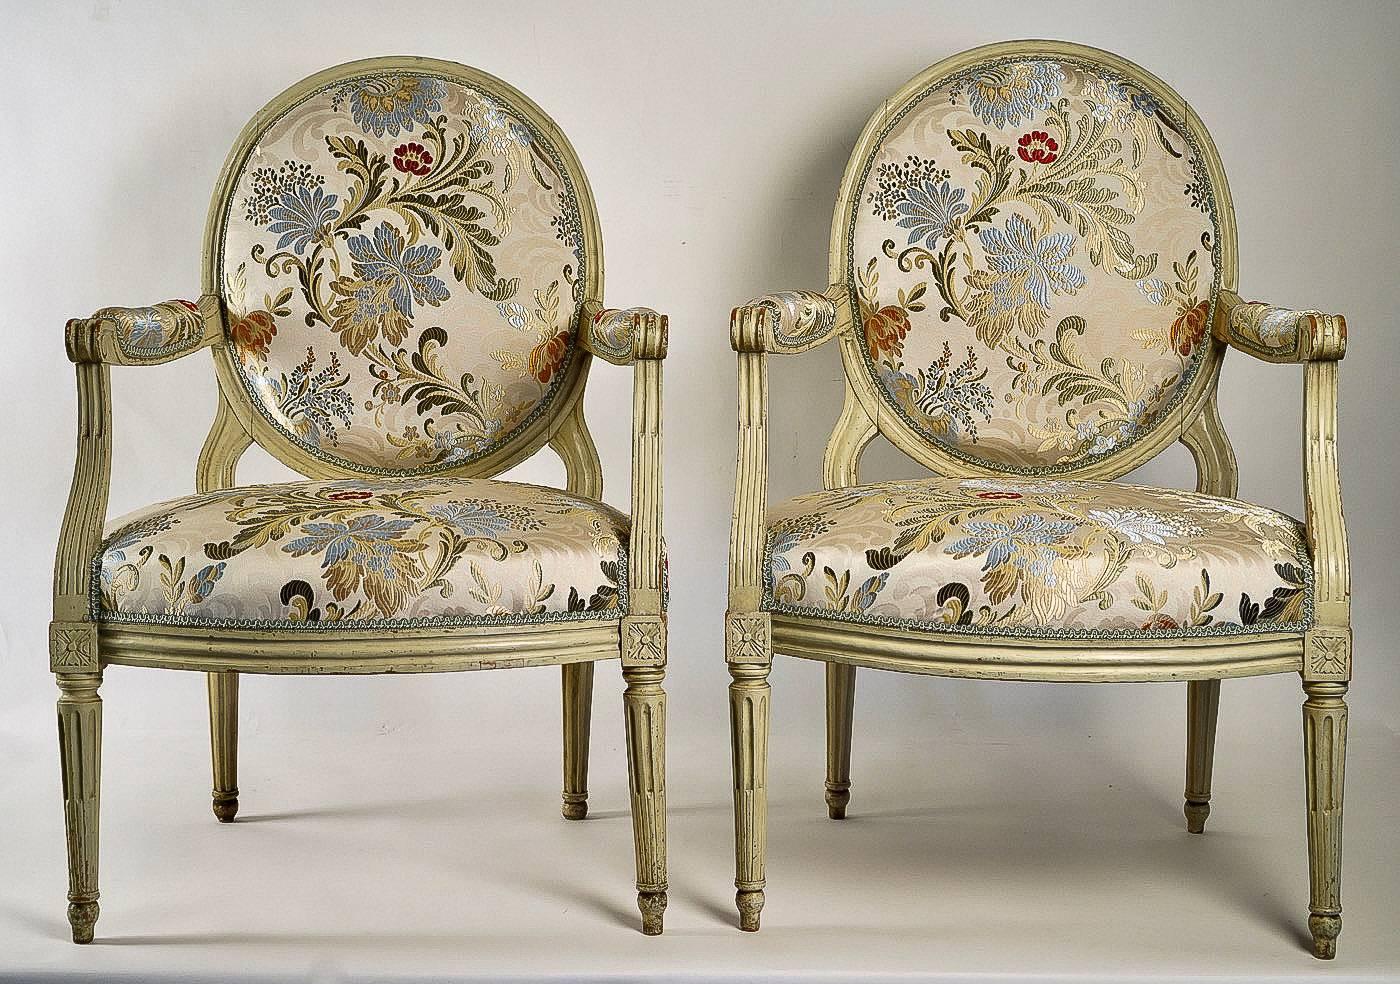 An excellent pair of large armchairs, hand-carved lacquered beech-wood.

French work in the classic Louis XVI period, late 18th century, circa 1780.

Fine condition. These beautiful pair of armchairs are very solid, and there upholstered with a new